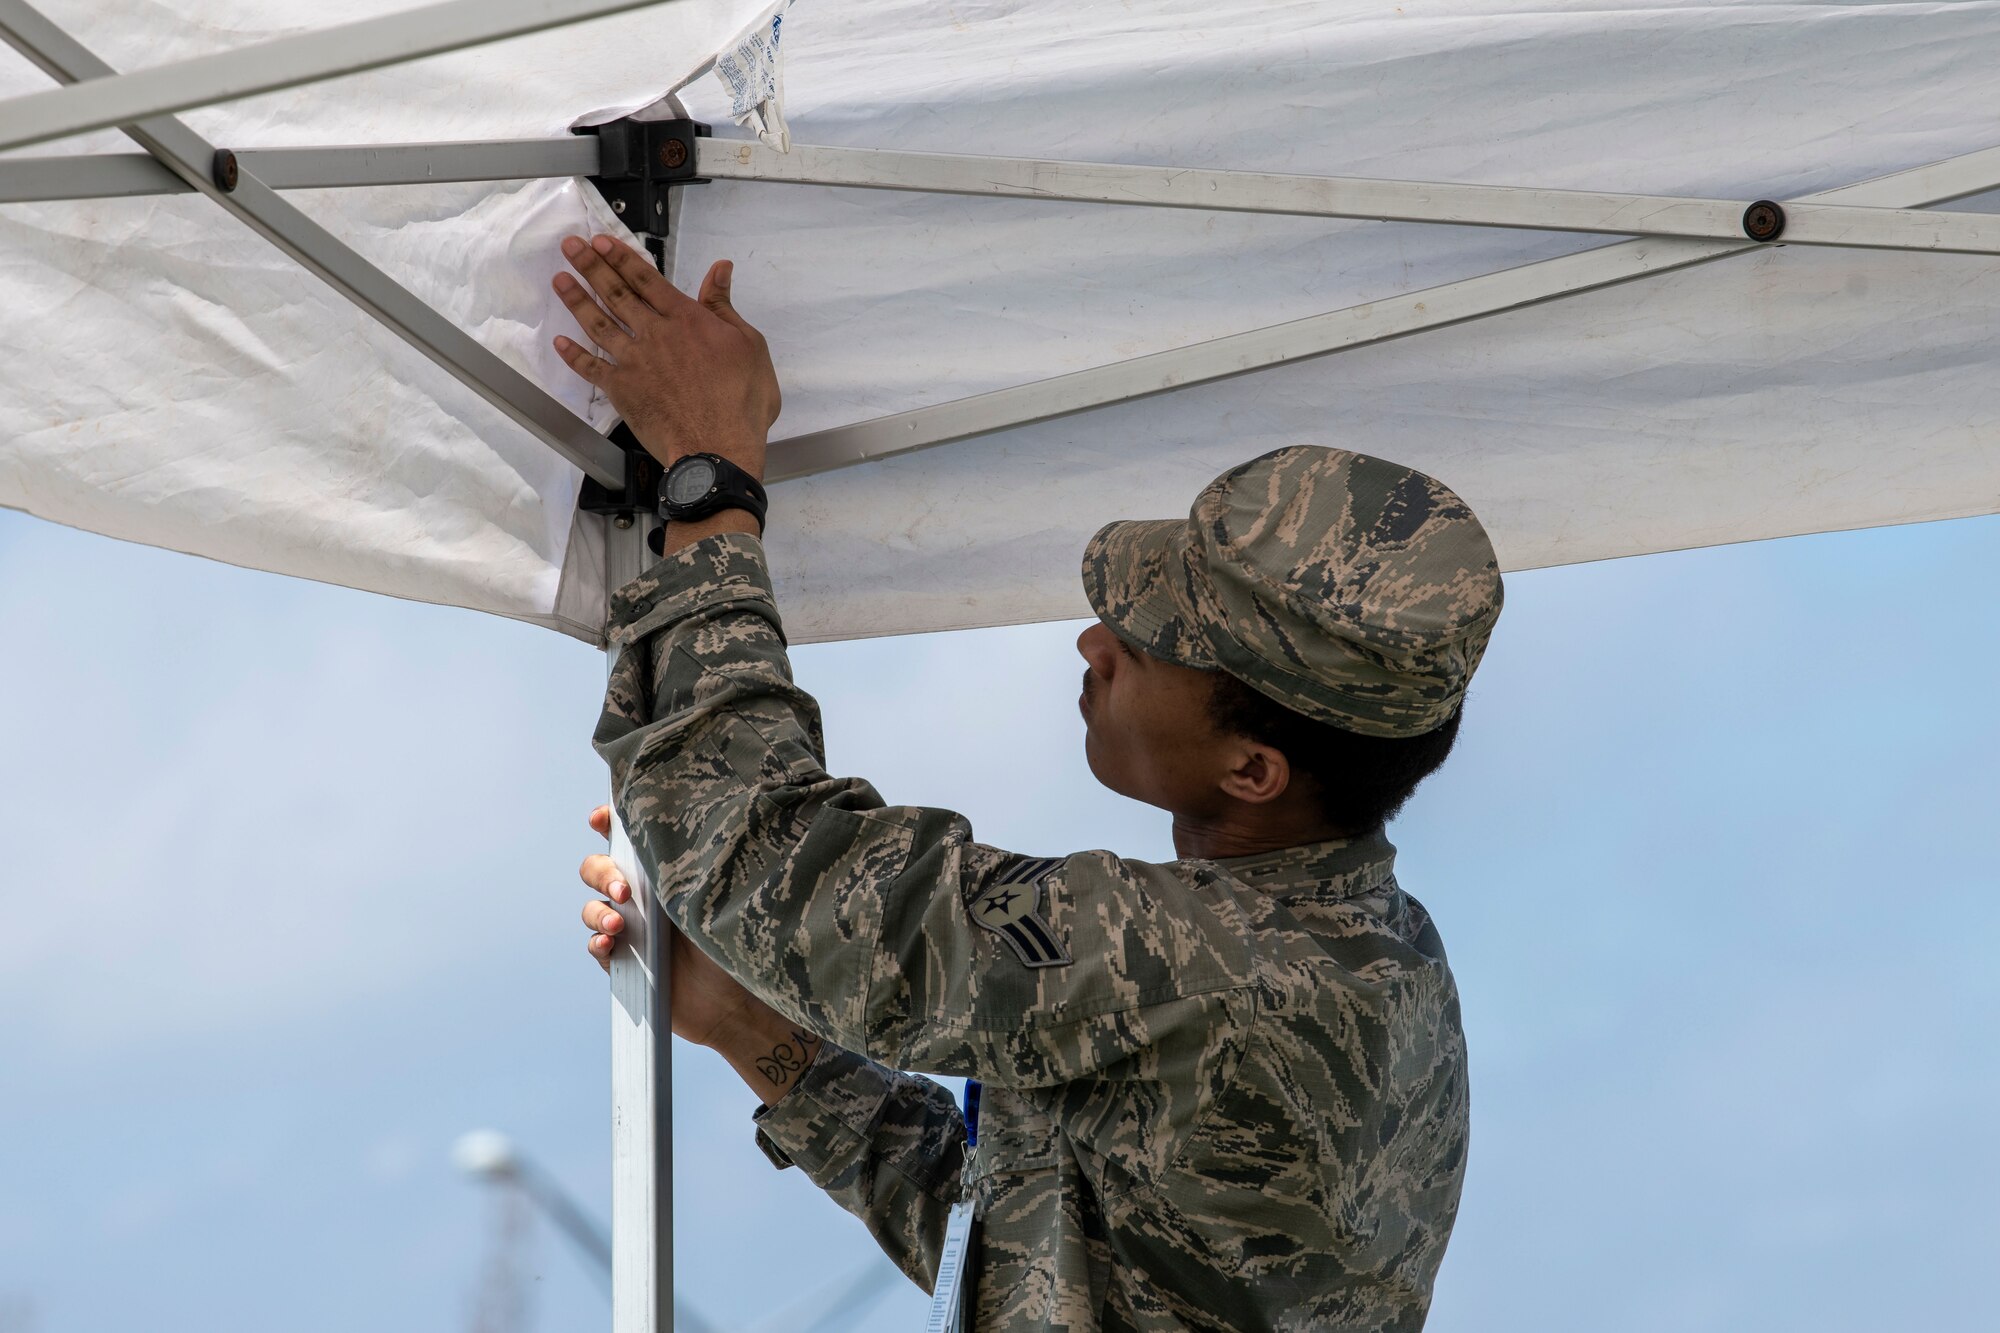 Airman 1st Class Christopher Glover, 436th Operational Medical Readiness Squadron dental technician, sets up a tent at Dover Air Force Base, Delaware, March 30, 2020. Tents were set up for shade at two locations for medical group members that were directing parking for military members, spouses and retirees. Dover AFB medical teams continue to care for Airmen and their families along with state and national response efforts. (U.S. Air Force photo by Senior Airman Christopher Quail)